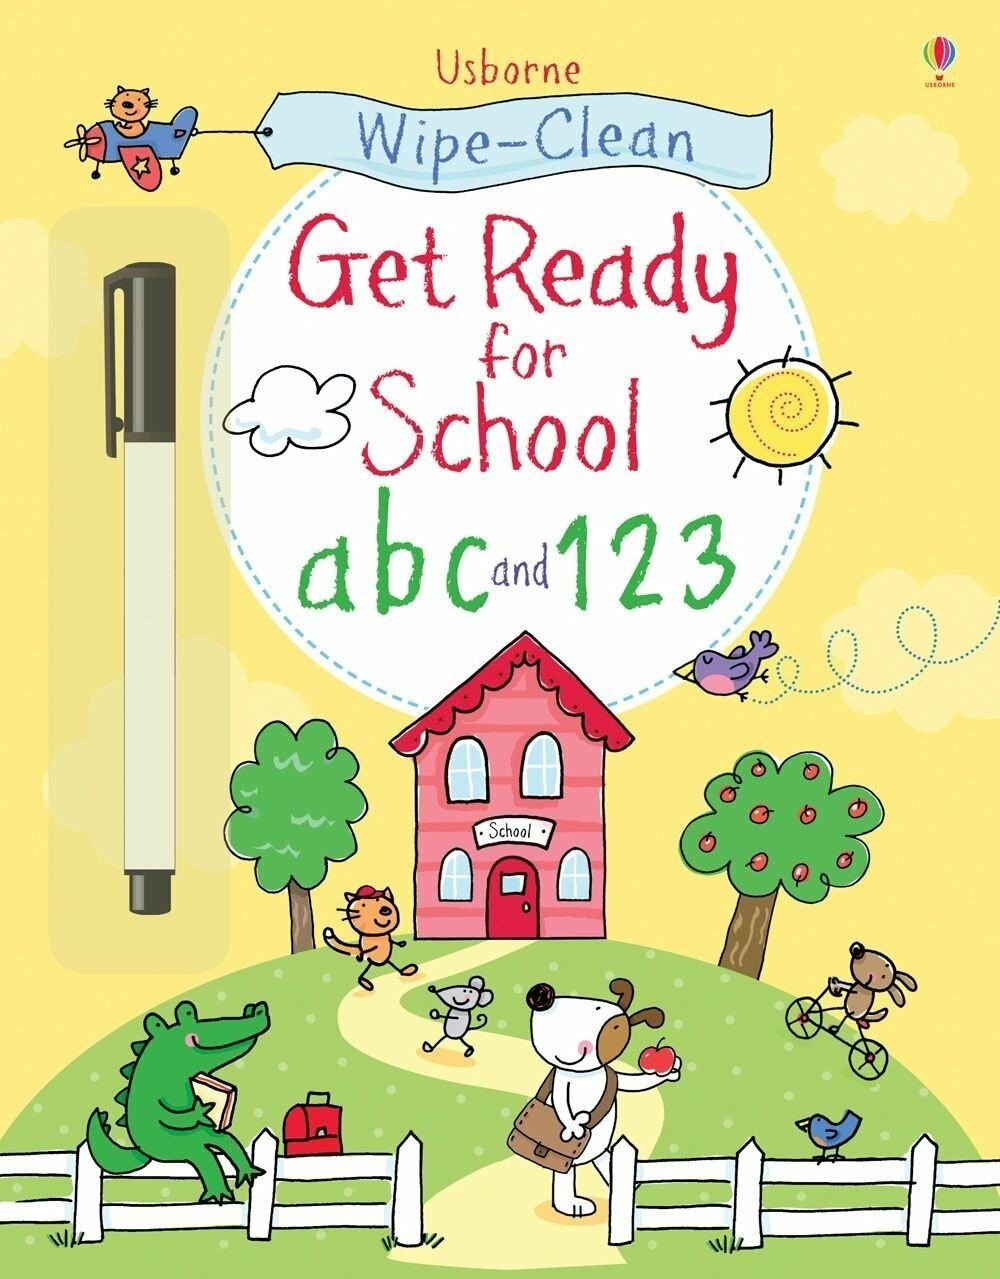 ipe-clean Get Ready for School abc and 123